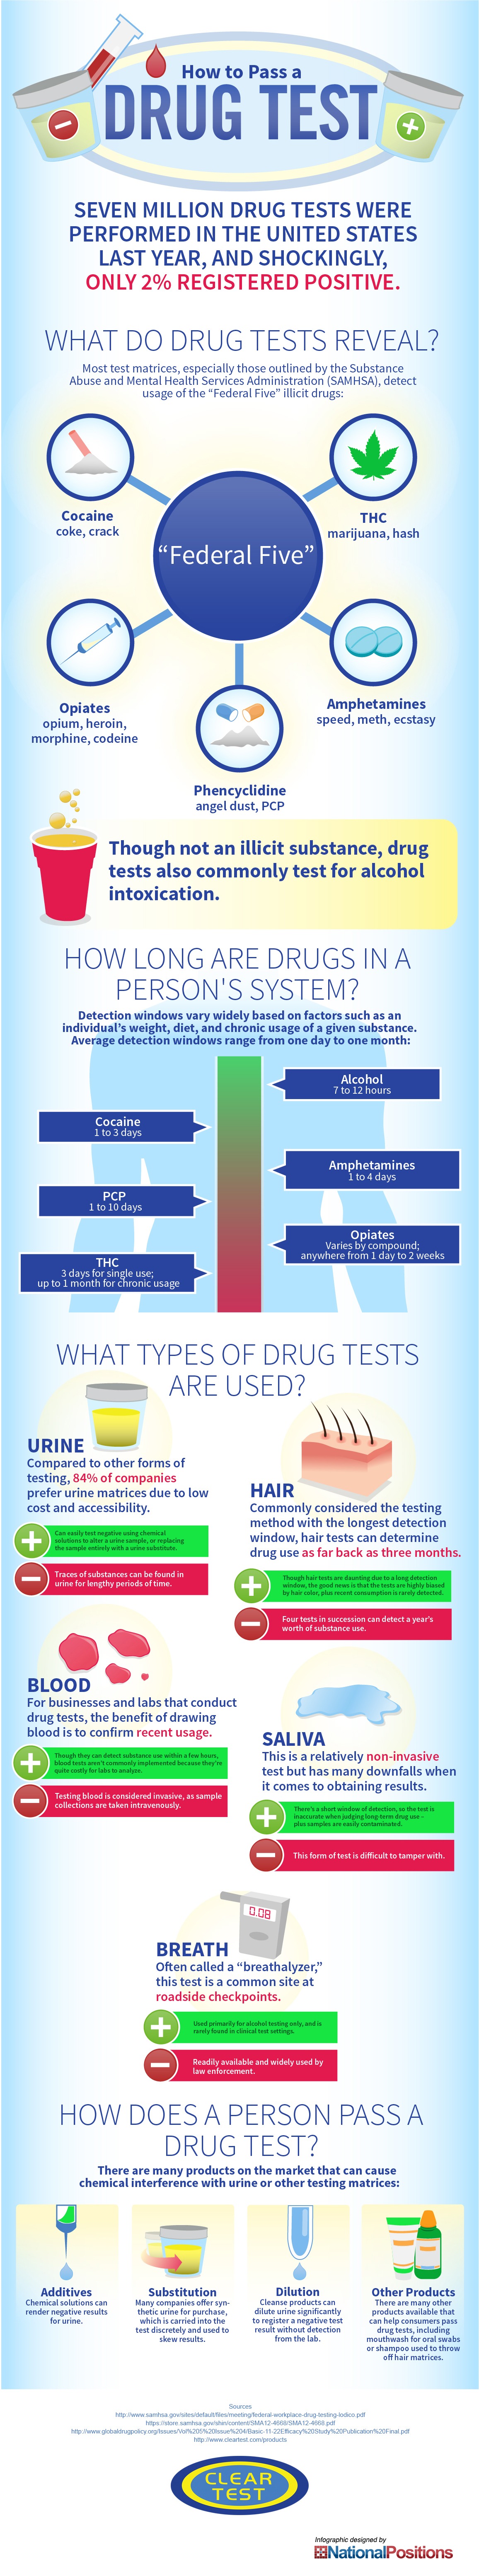 How to Pass a Drug Test Infographic - Clear Test